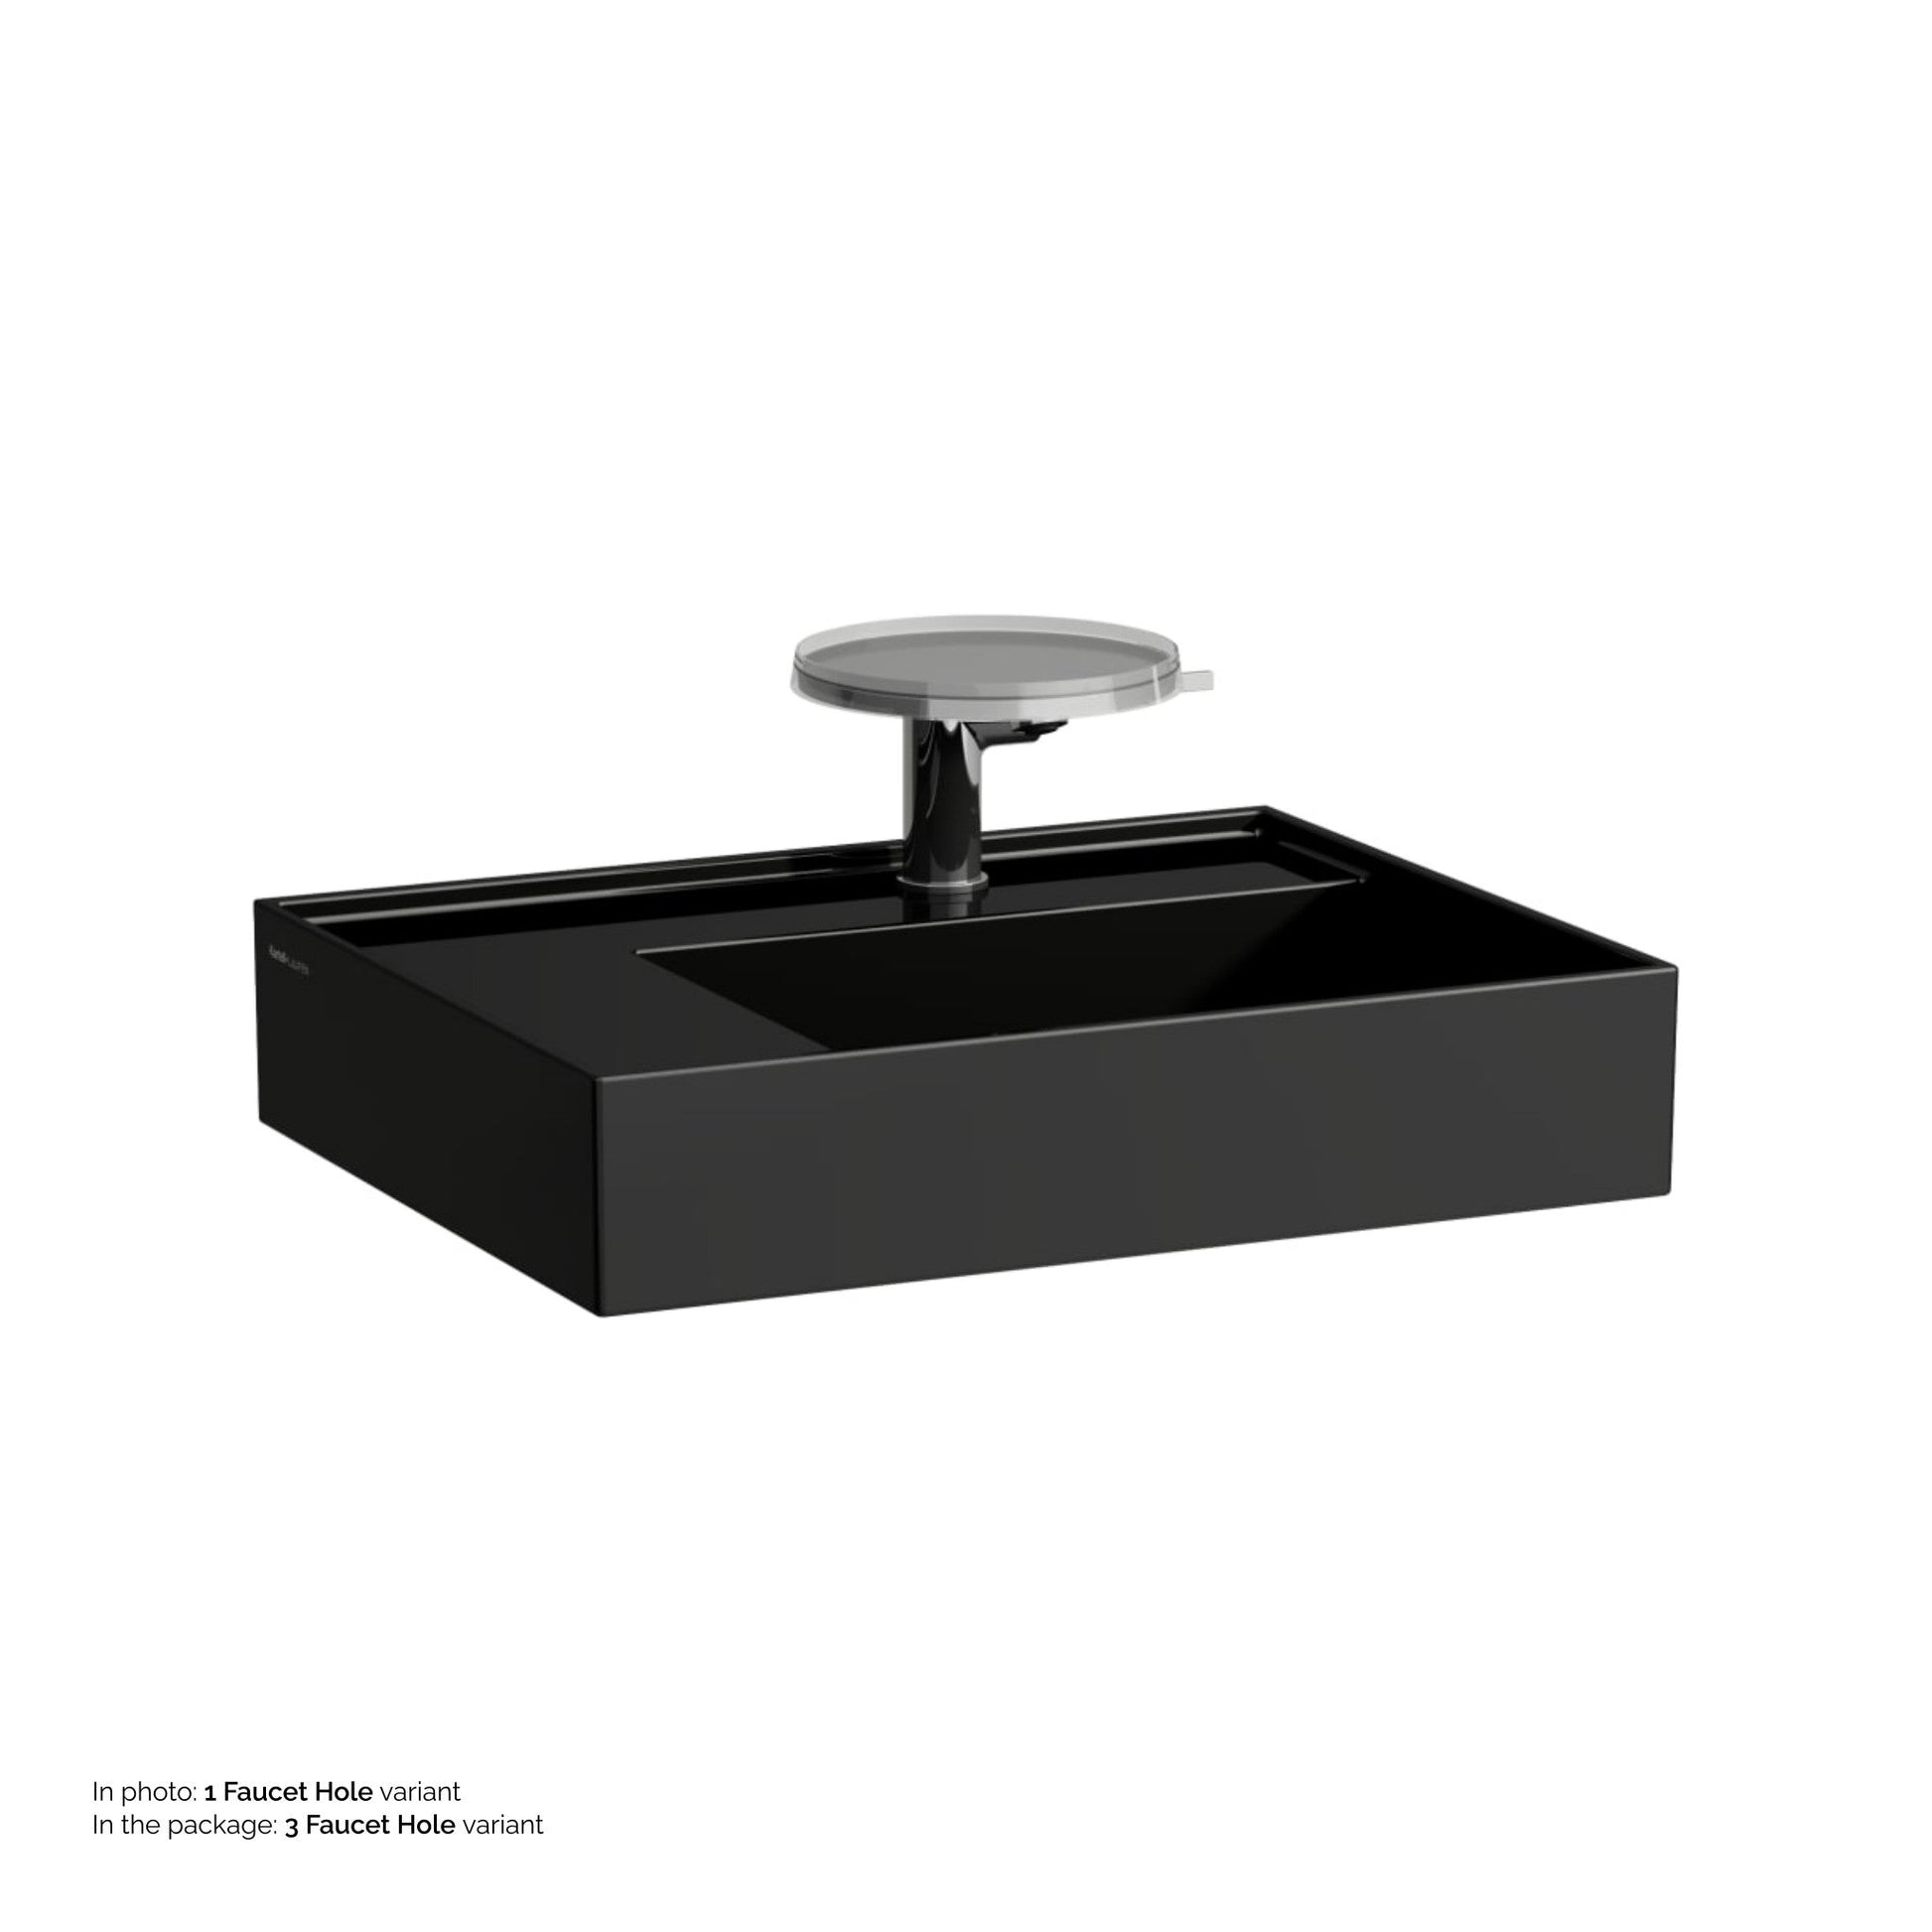 Laufen Kartell 24" x 18" Glossy Black Countertop Shelf-Left Bathroom Sink With 3 Faucet Holes